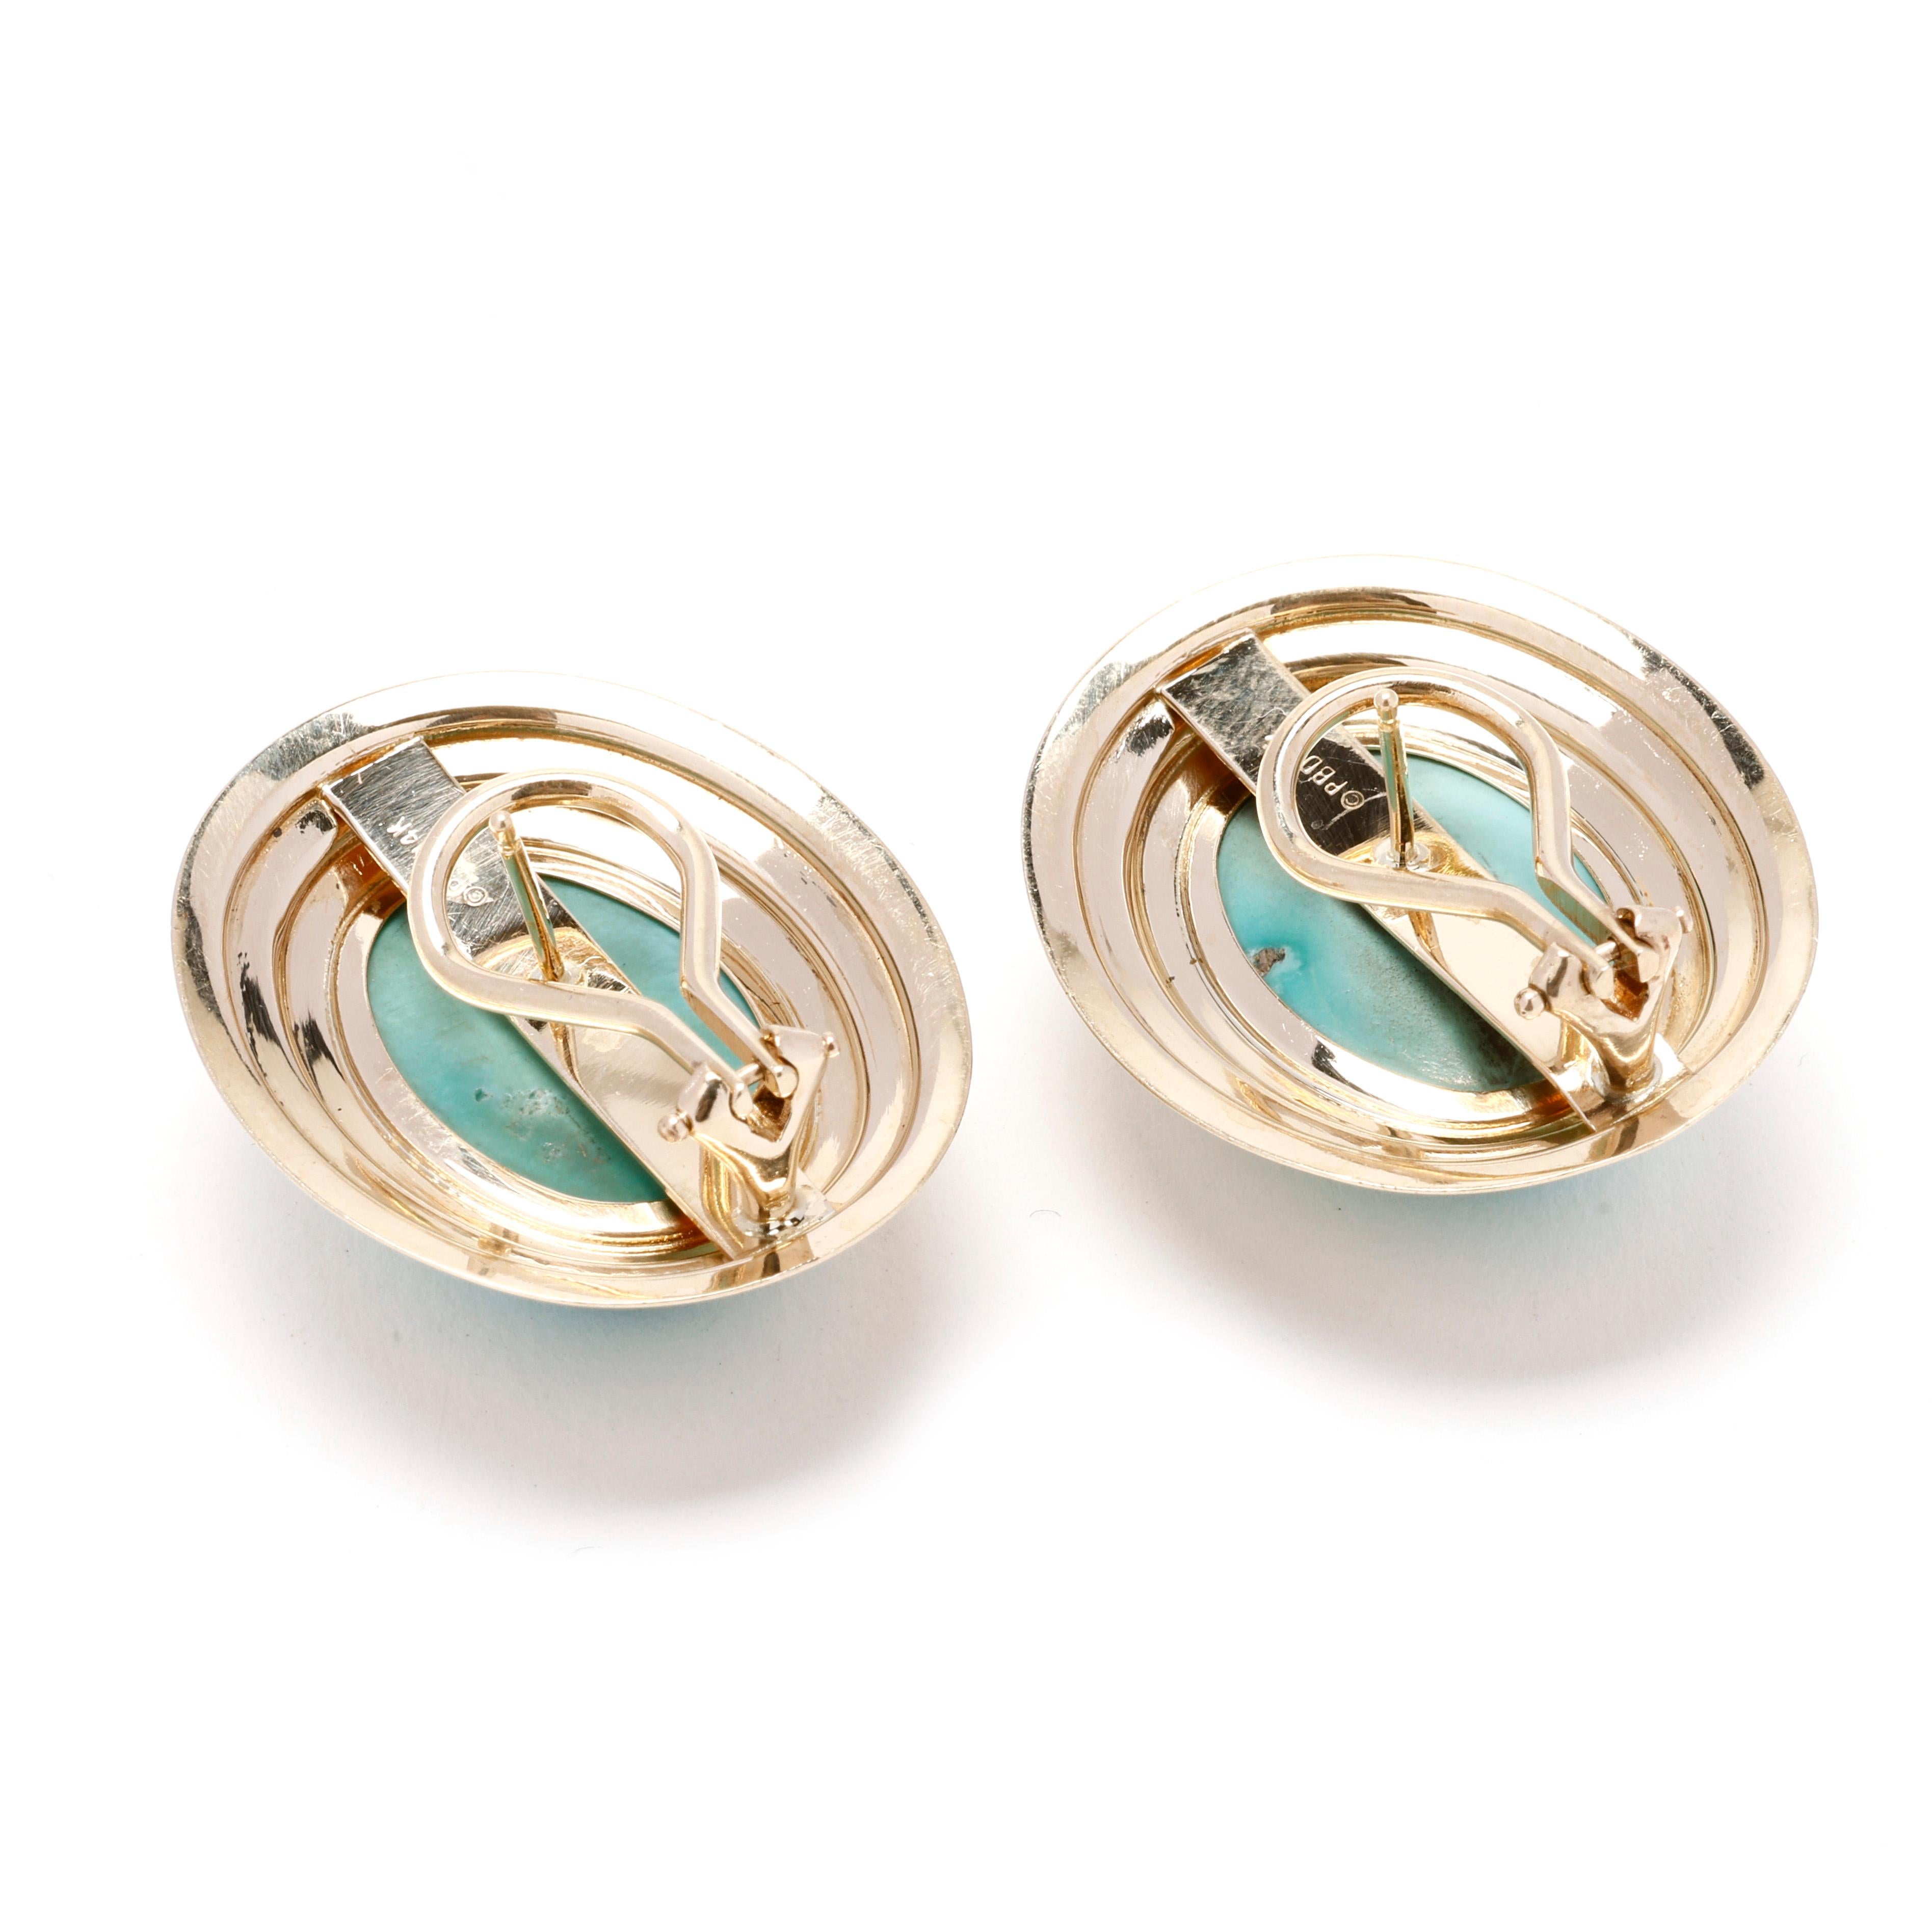 Step back in time with these exquisite Vintage Large Turquoise Oval Stud Earrings. Crafted in luxurious 14k yellow gold, these statement earrings feature vibrant turquoise gemstones set in classic oval studs, showcasing a timeless design that exudes